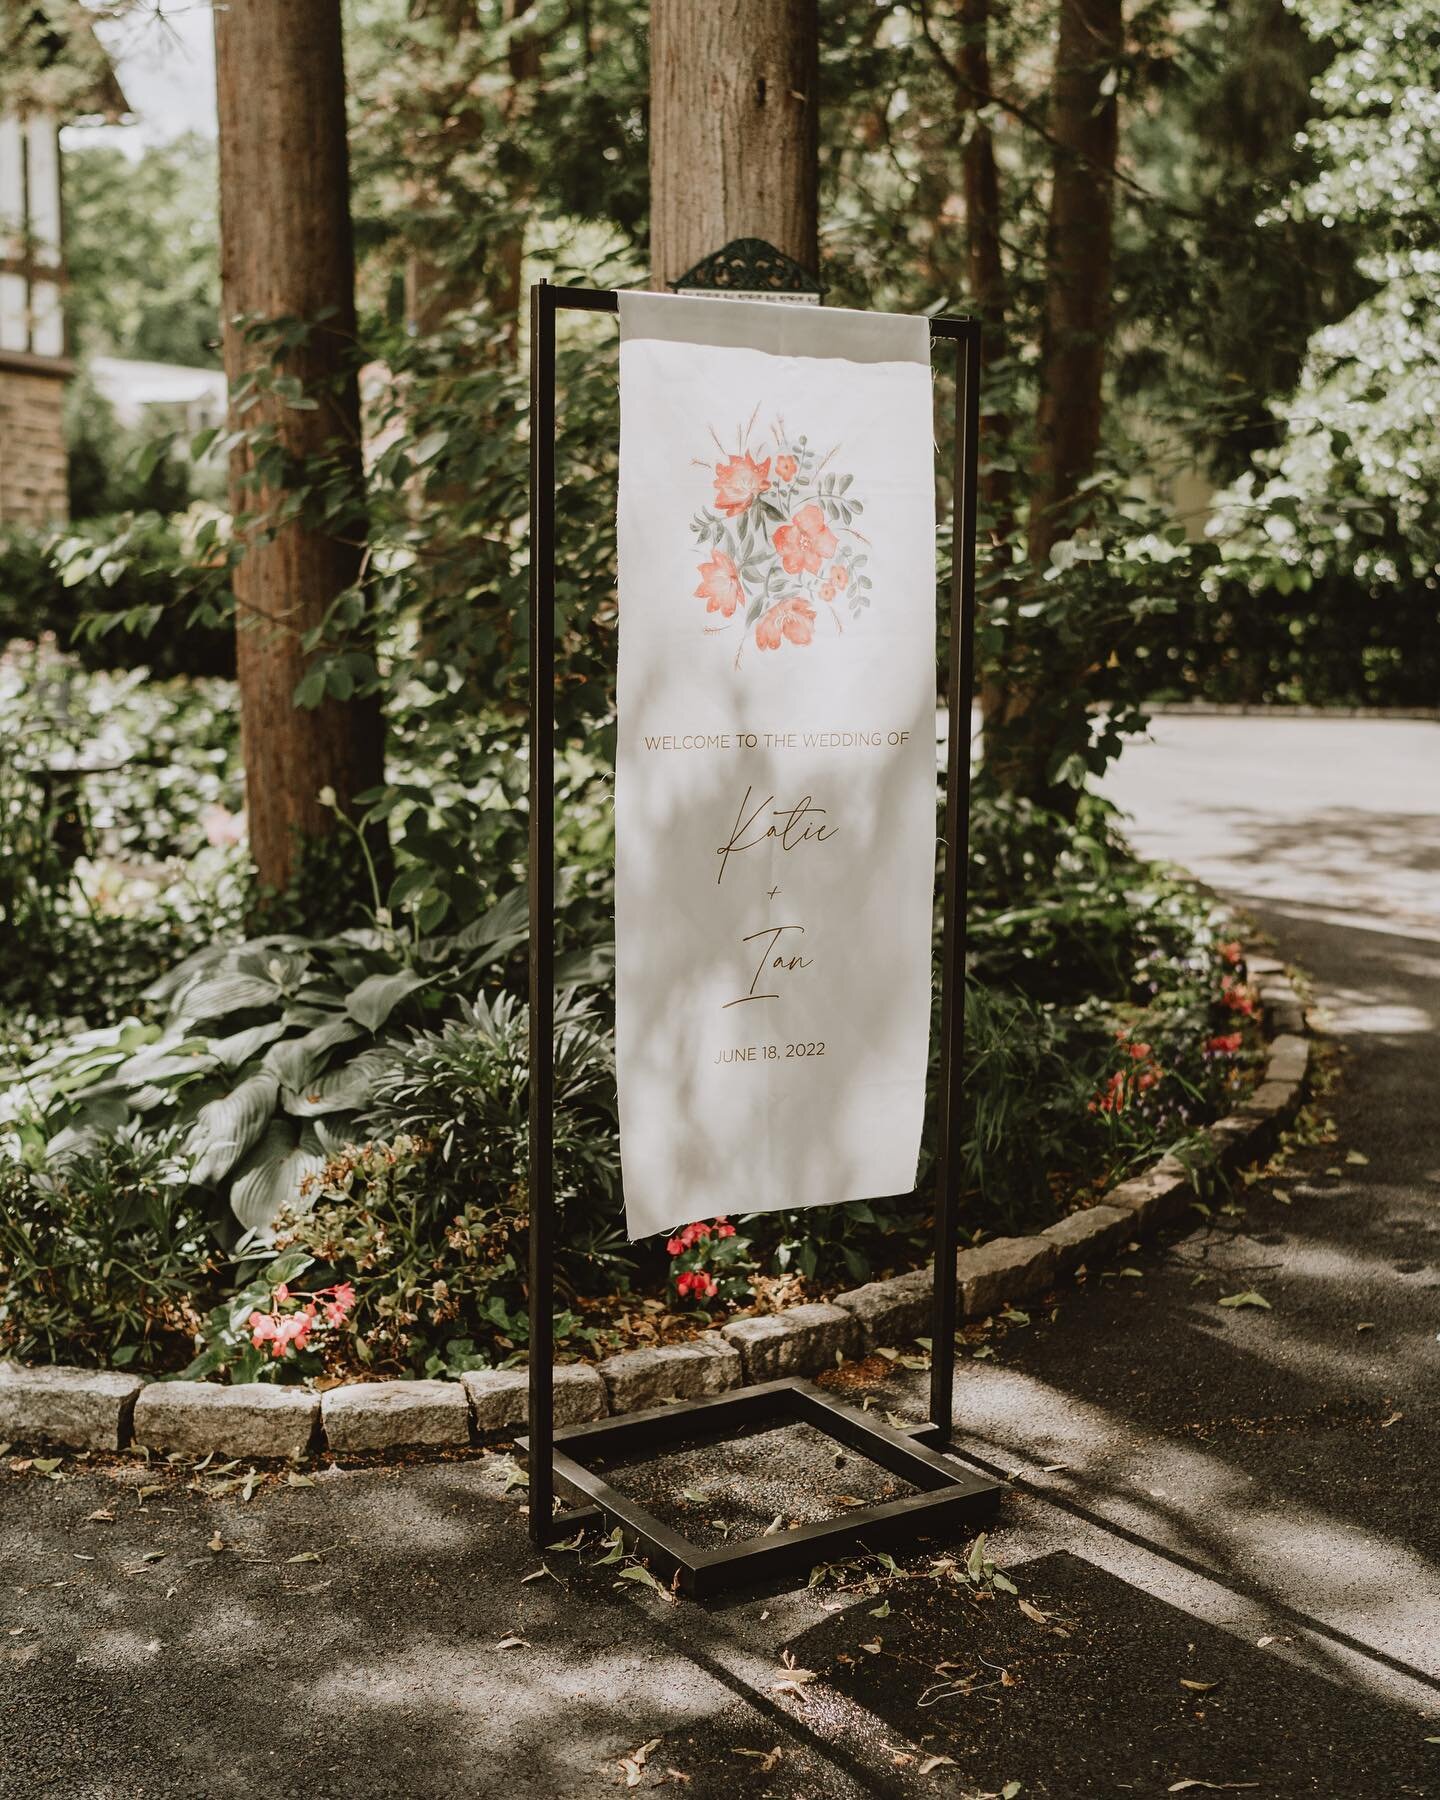 Sweet and simple fabric welcome sign for Katie and Ian&rsquo;s backyard wedding. Love the personal touch of incorporating the floral illustration designed by the bride&rsquo;s brother.

Photography: @the.real.m2photo 
Planning: @twolittlebirdsplan 

